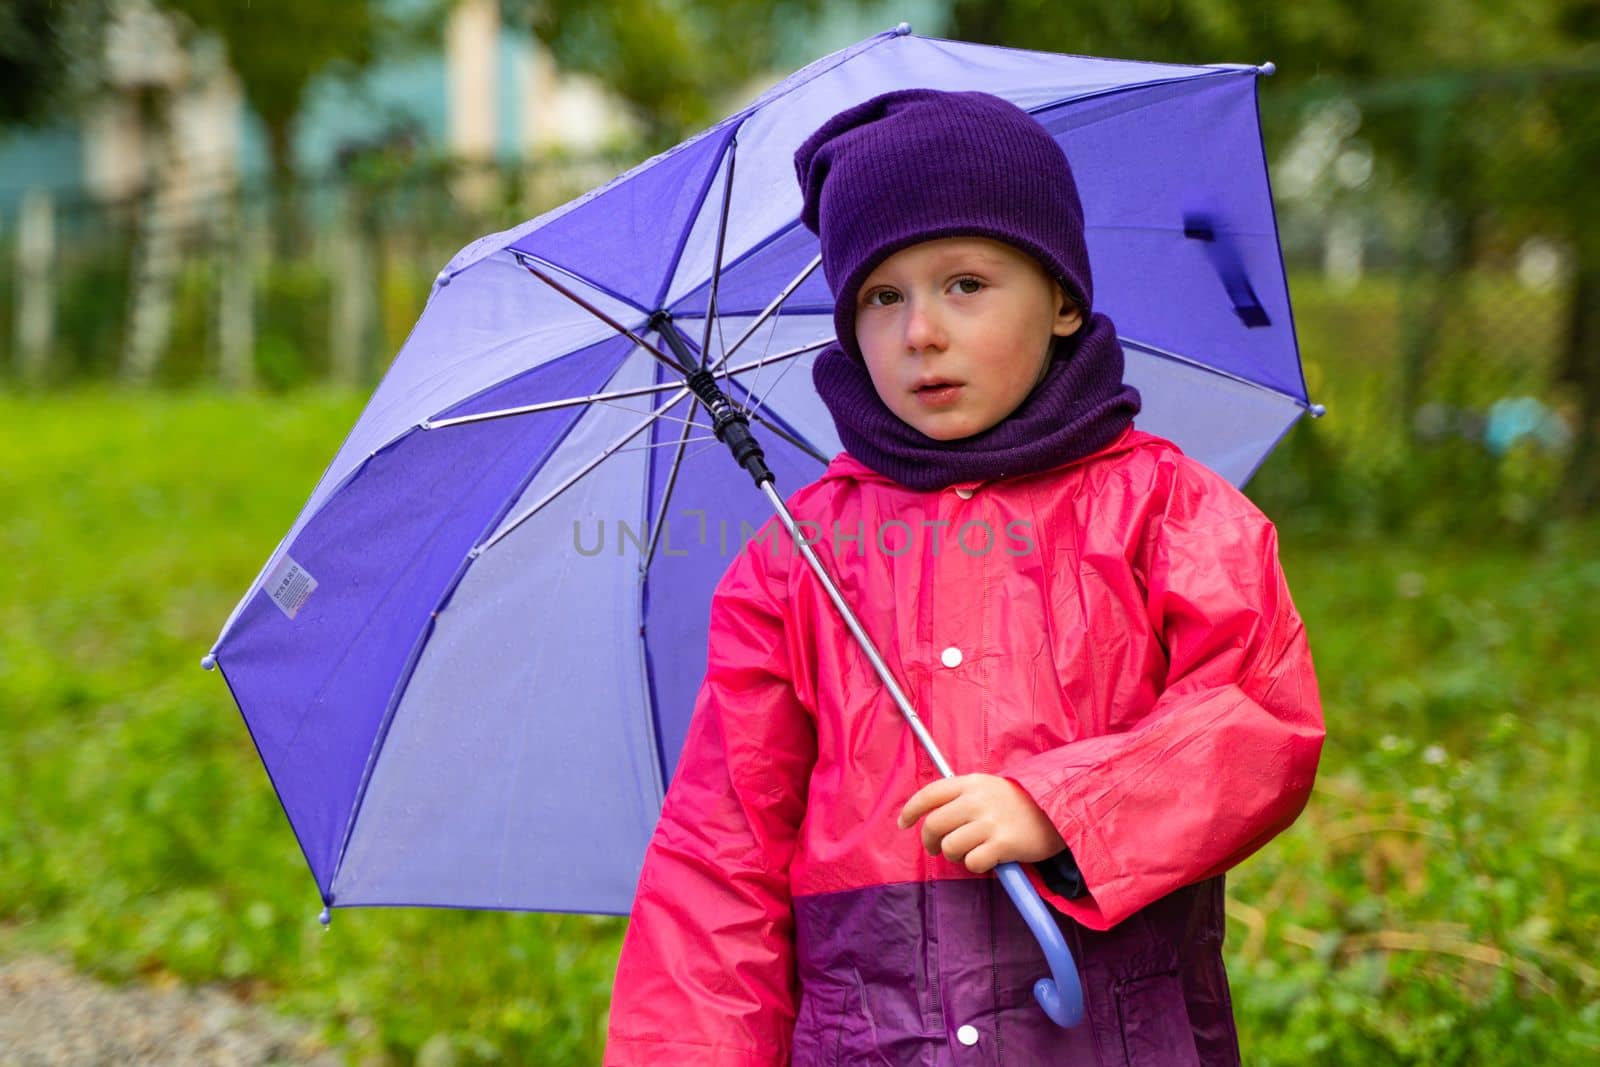 Child playing in autumn rain. Kid with umbrella. Outdoor fun for kids by any weather. Rain waterproof wear, boots and jacket for children by voffka23